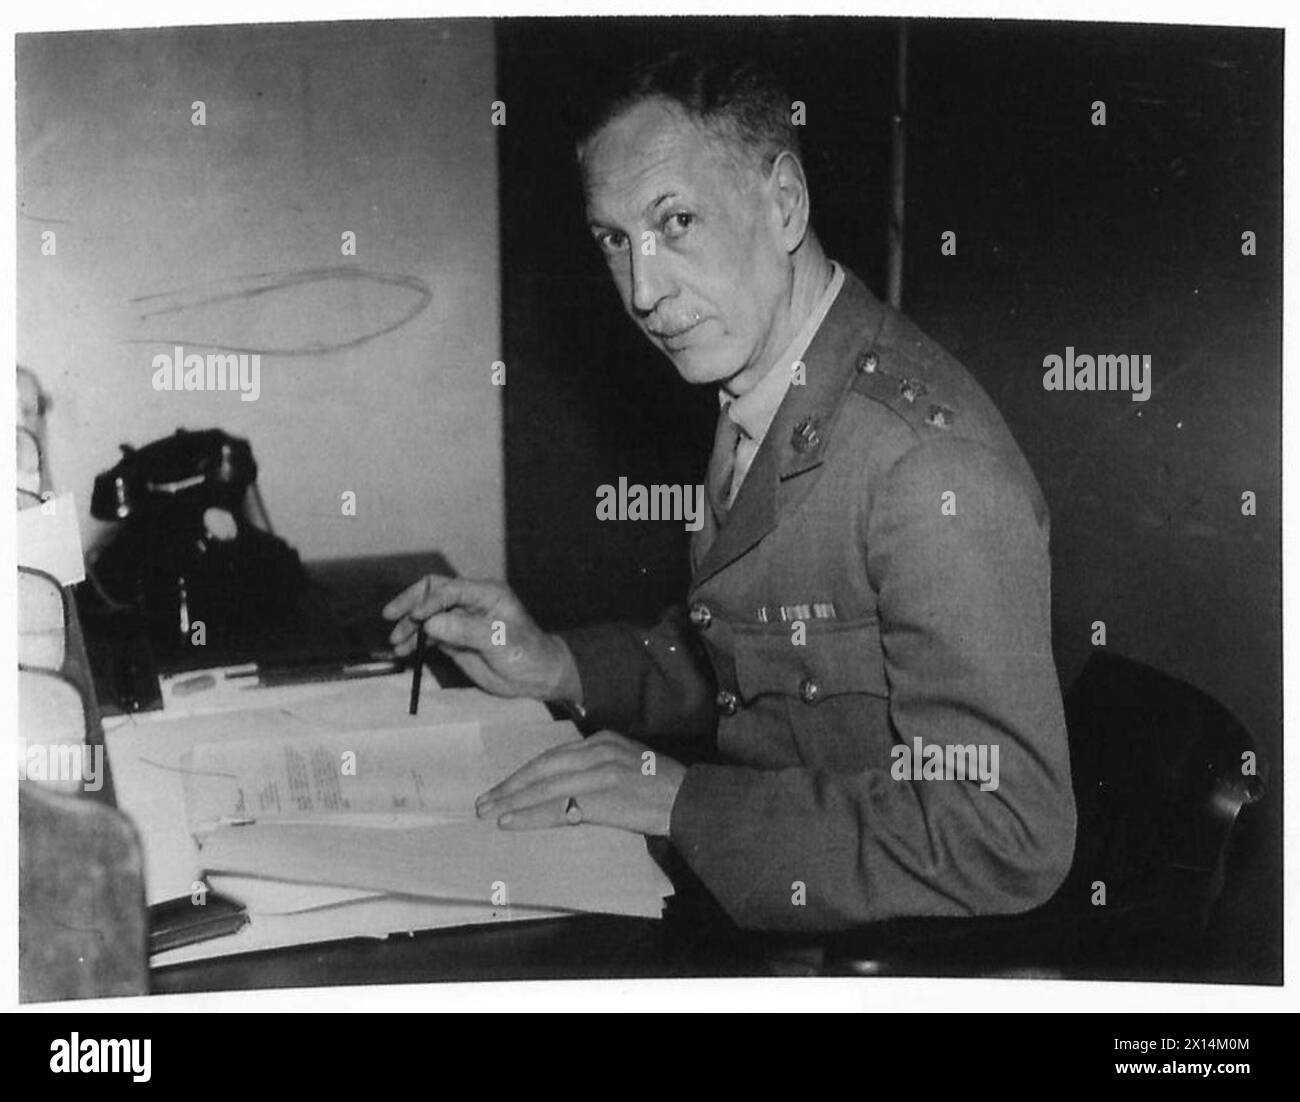 A.T.S. - Colonel Melville, G.S.O.2., P.R.I British Army Stockfoto